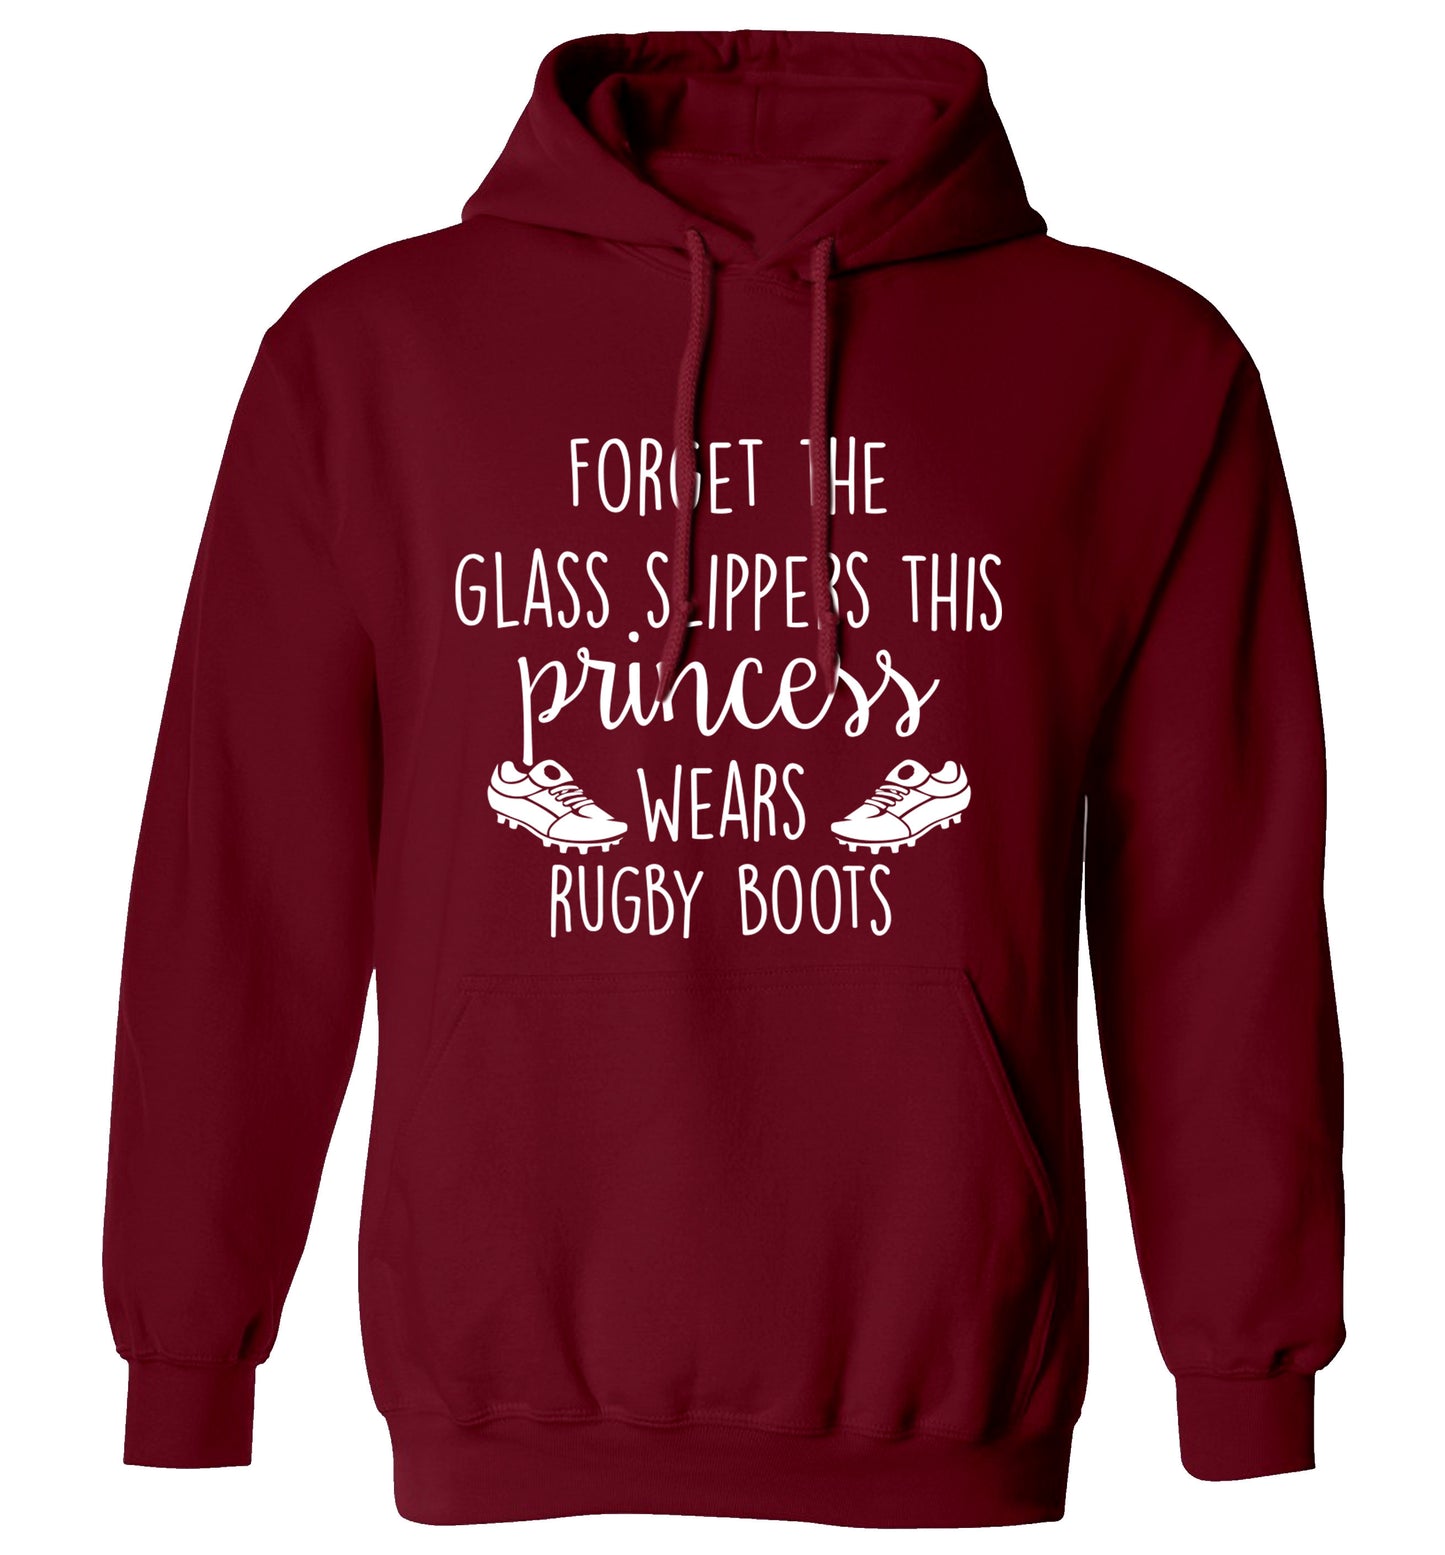 Forget the glass slippers this princess wears rugby boots adults unisex maroon hoodie 2XL